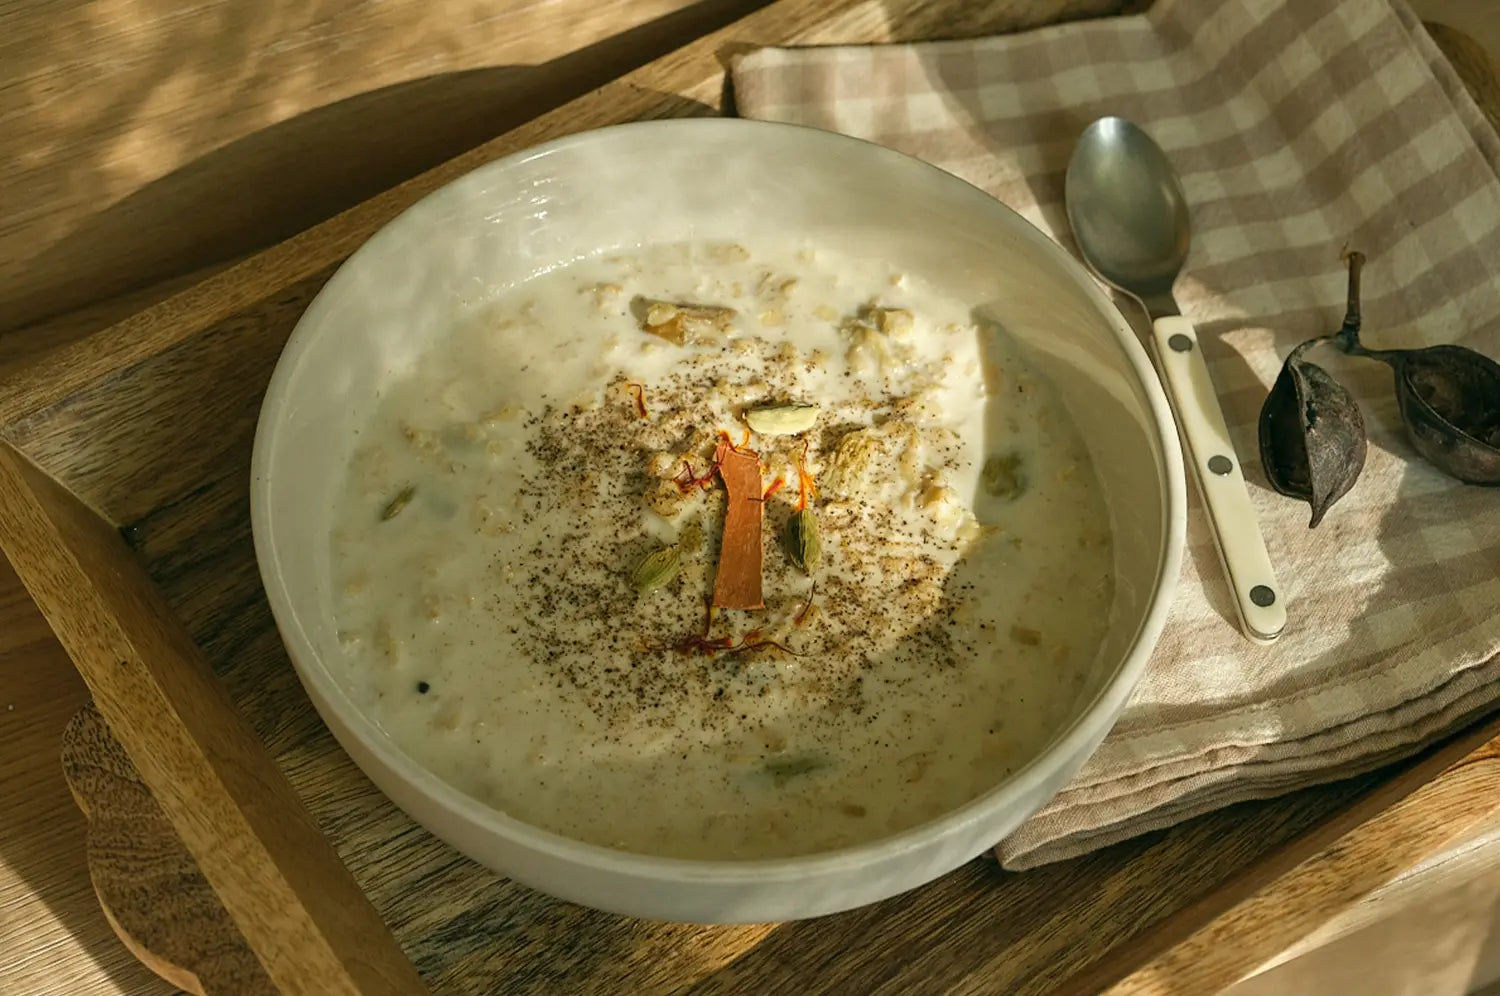 Image of Saffron Pistachio Oat Porridge in a bowl on a tray with a spoon and napkin.